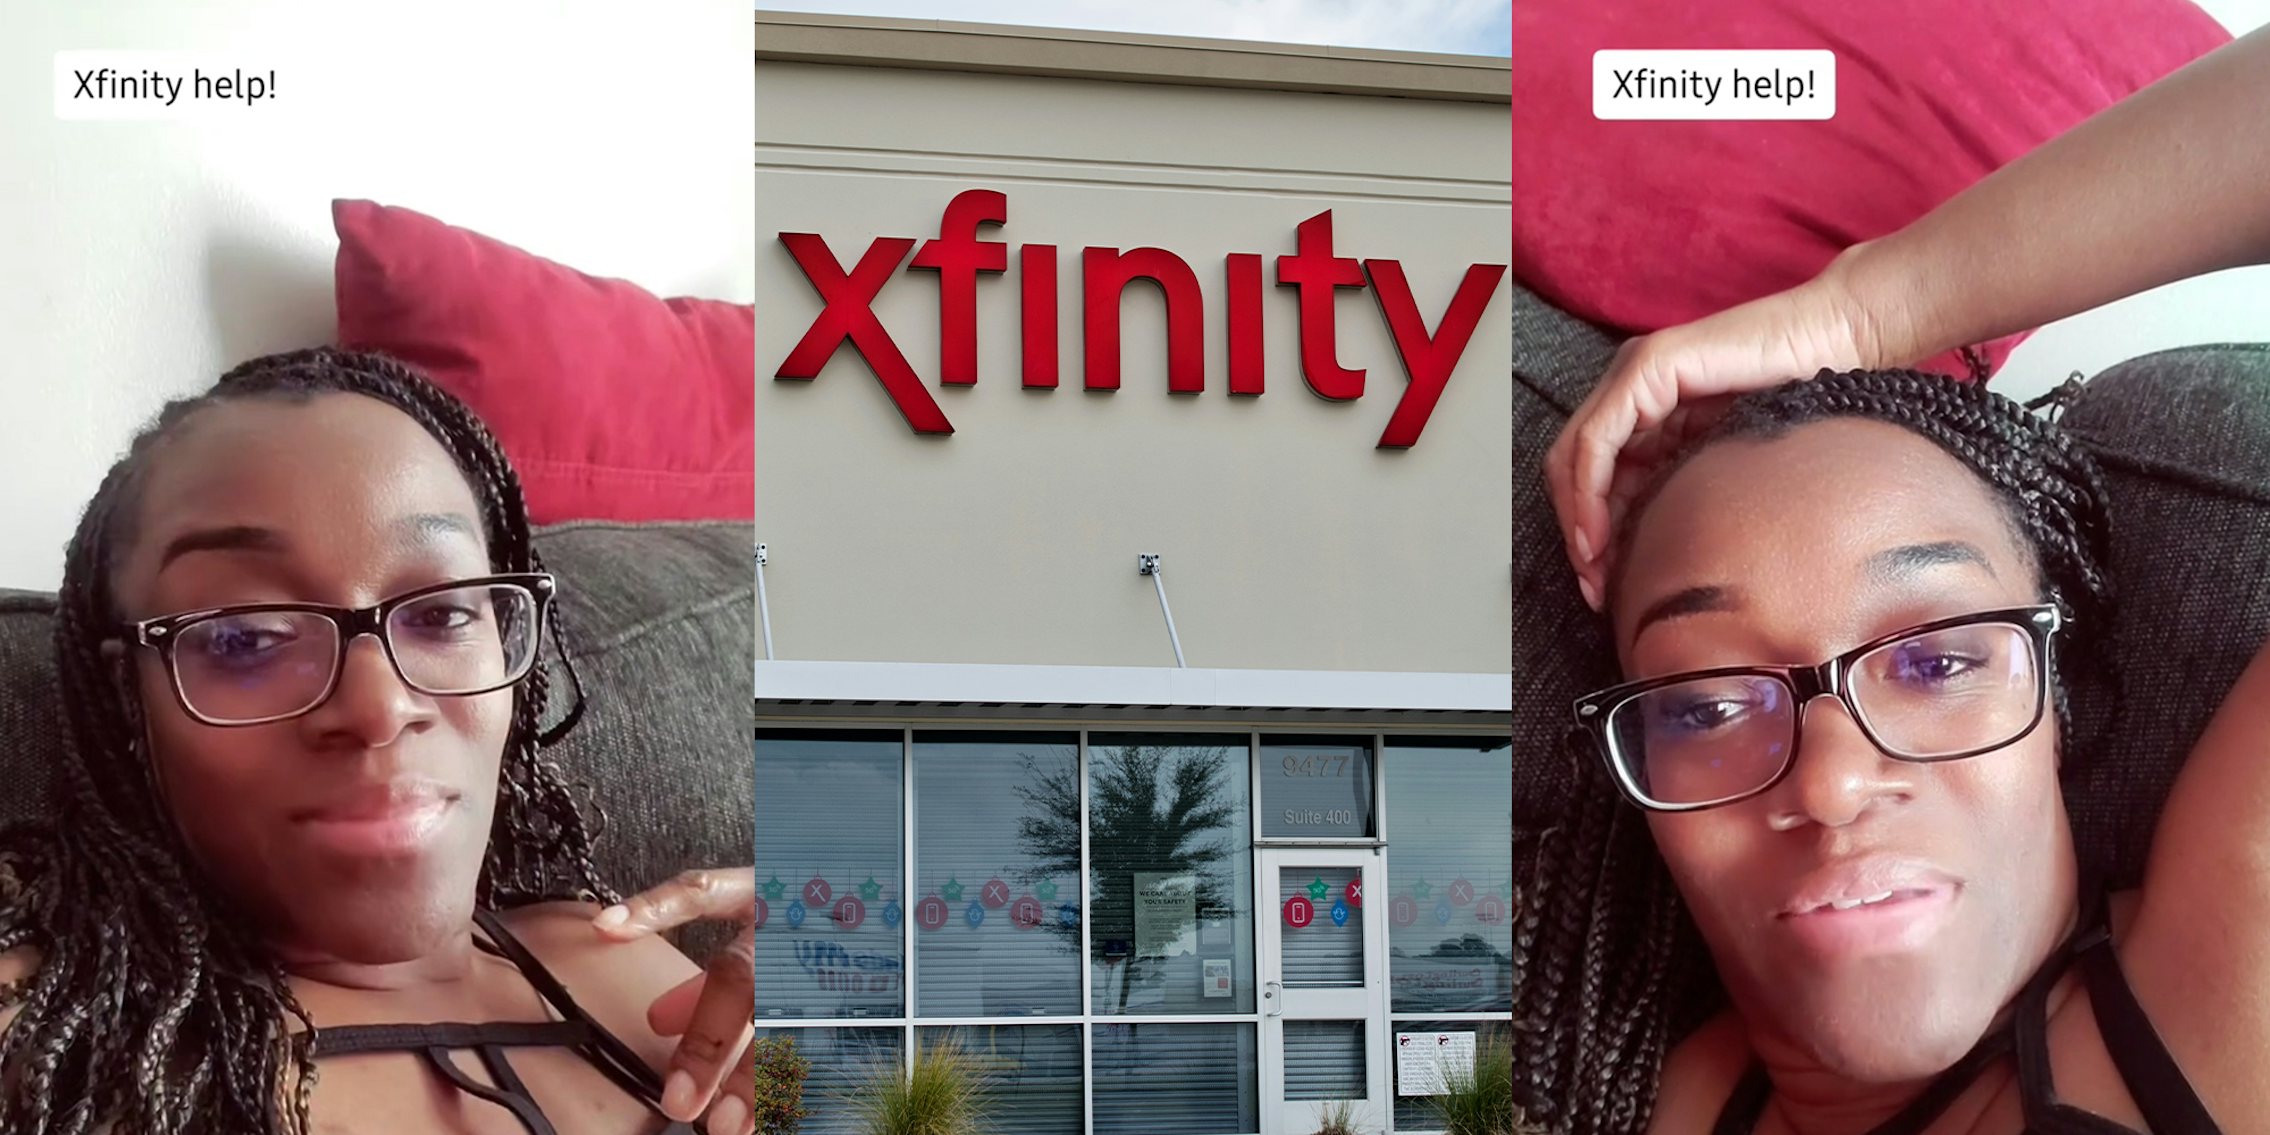 Former XFinity worker exposes how to quickly cancel your service